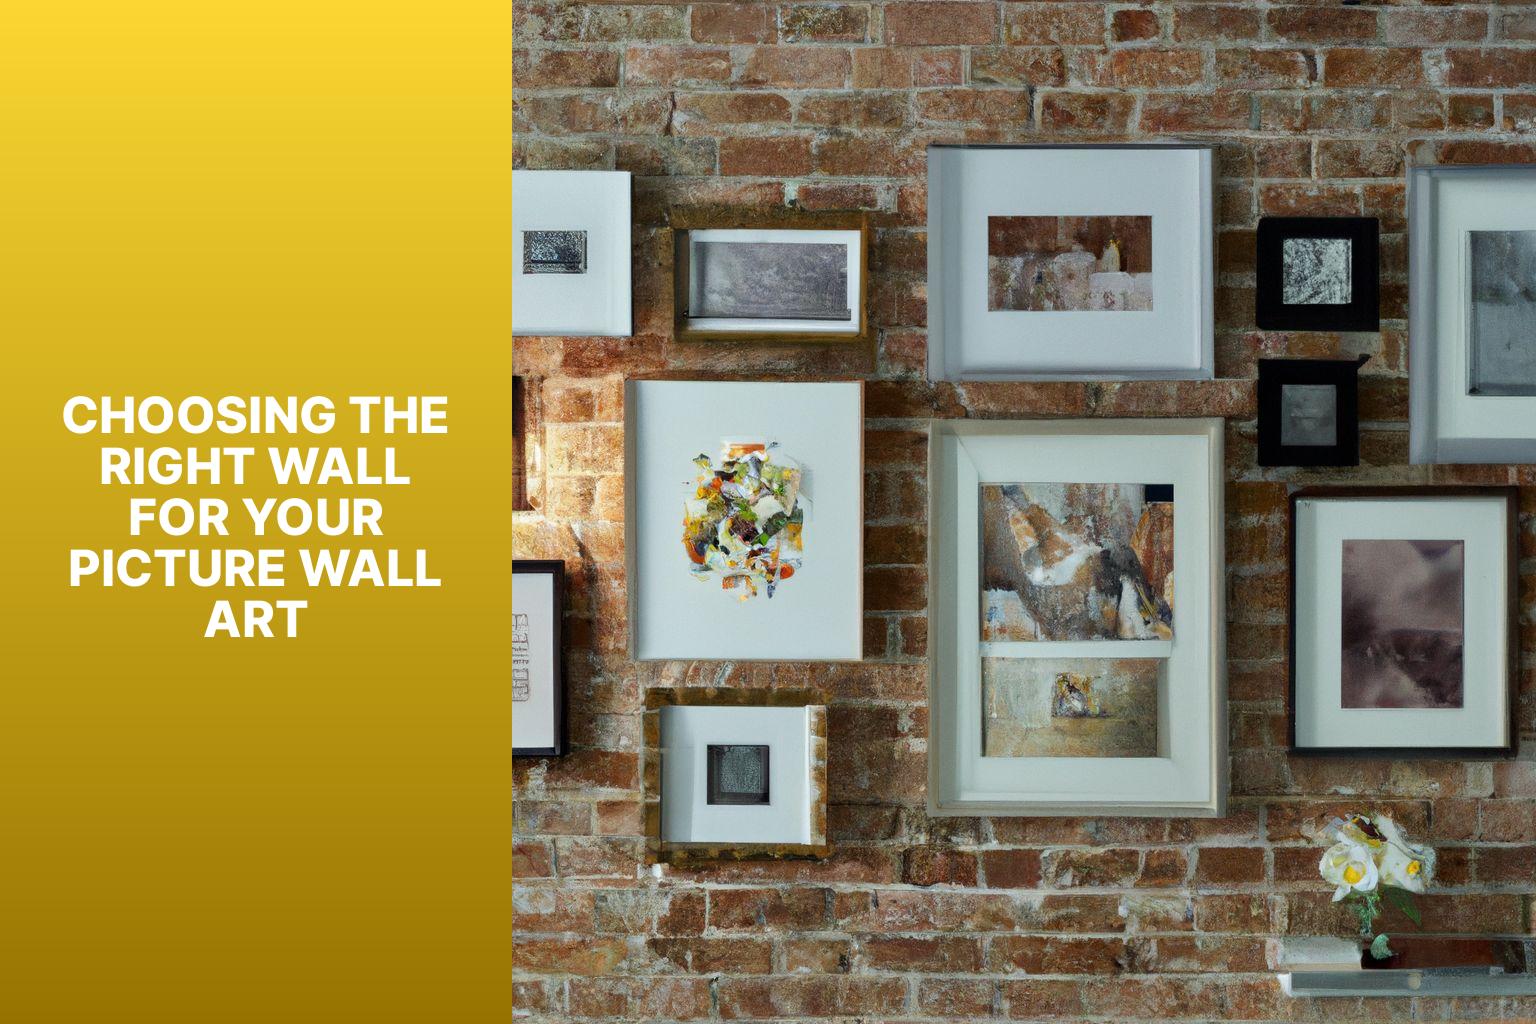 Choosing the Right Wall for Your Picture Wall Art - Creating a Picture Wall Art in Your Home 